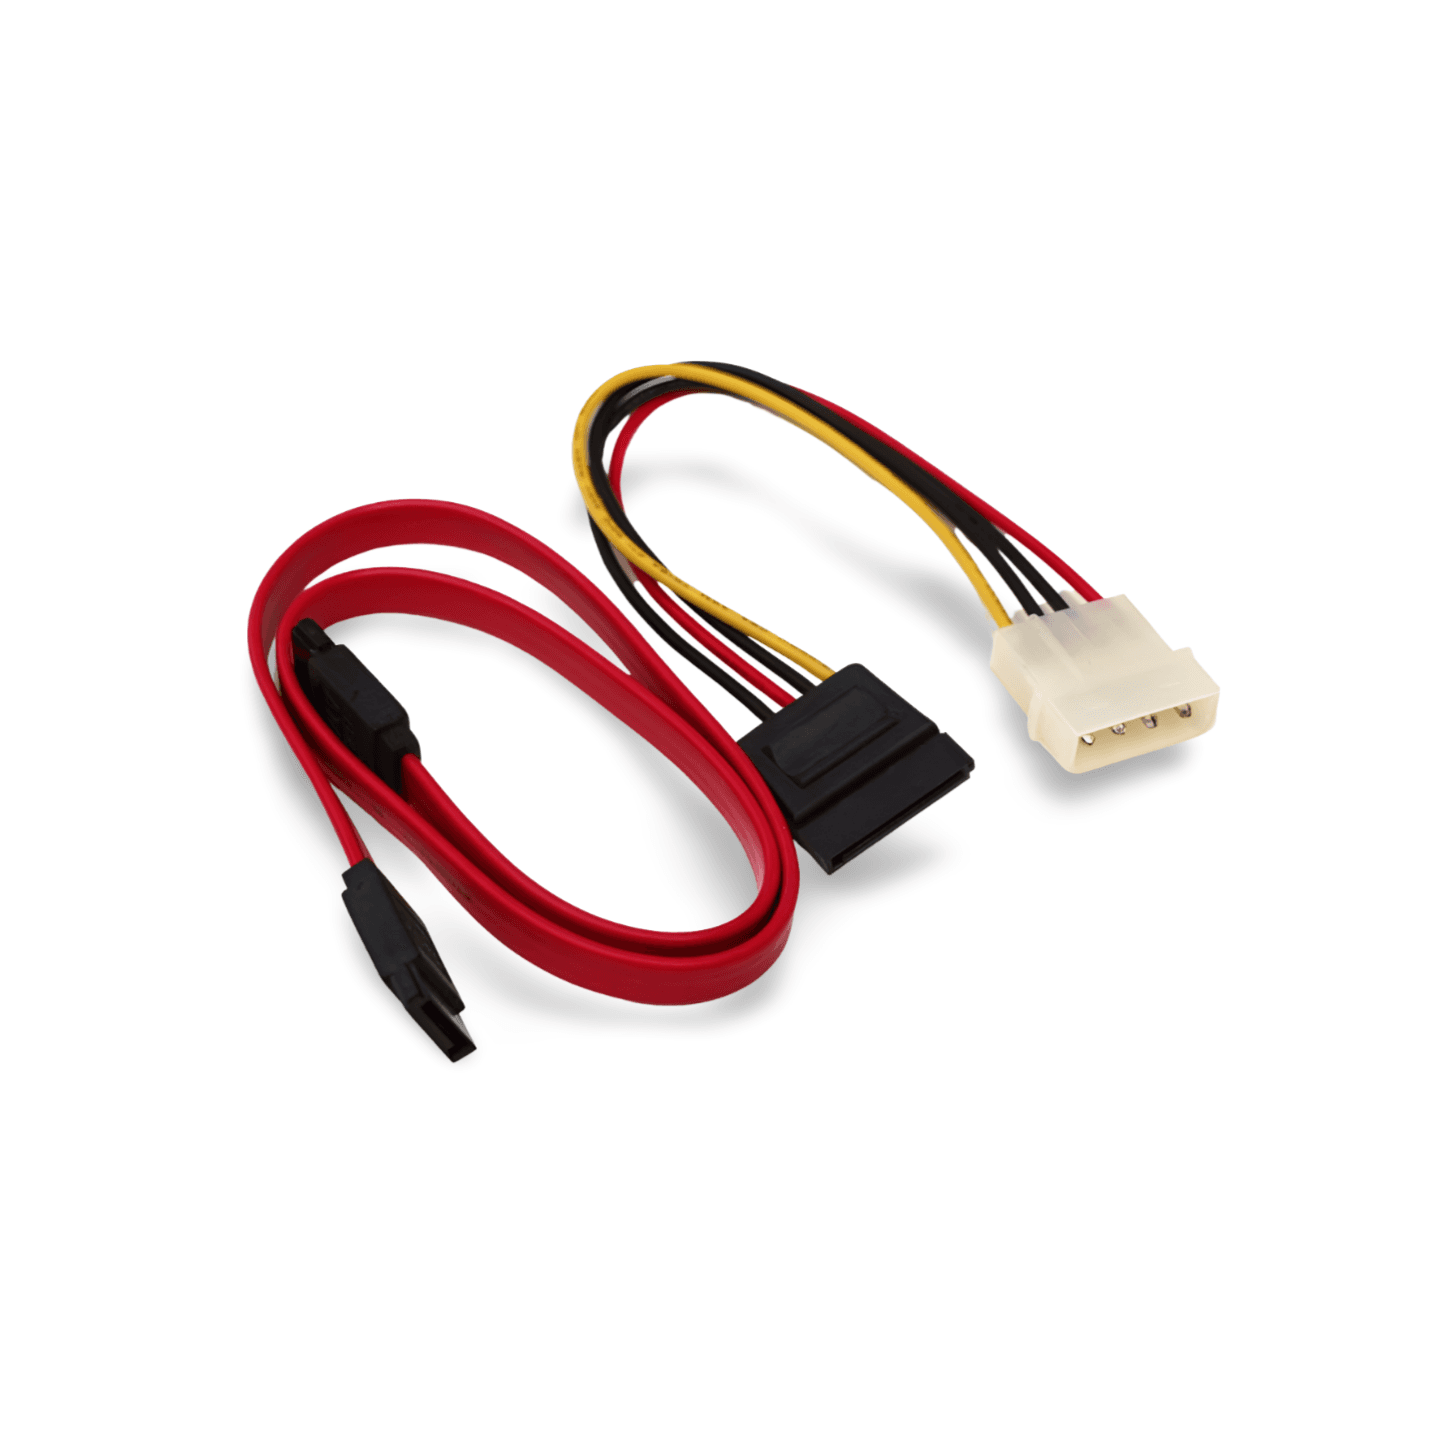 FoxConn SATA Drive Data Cable Set red